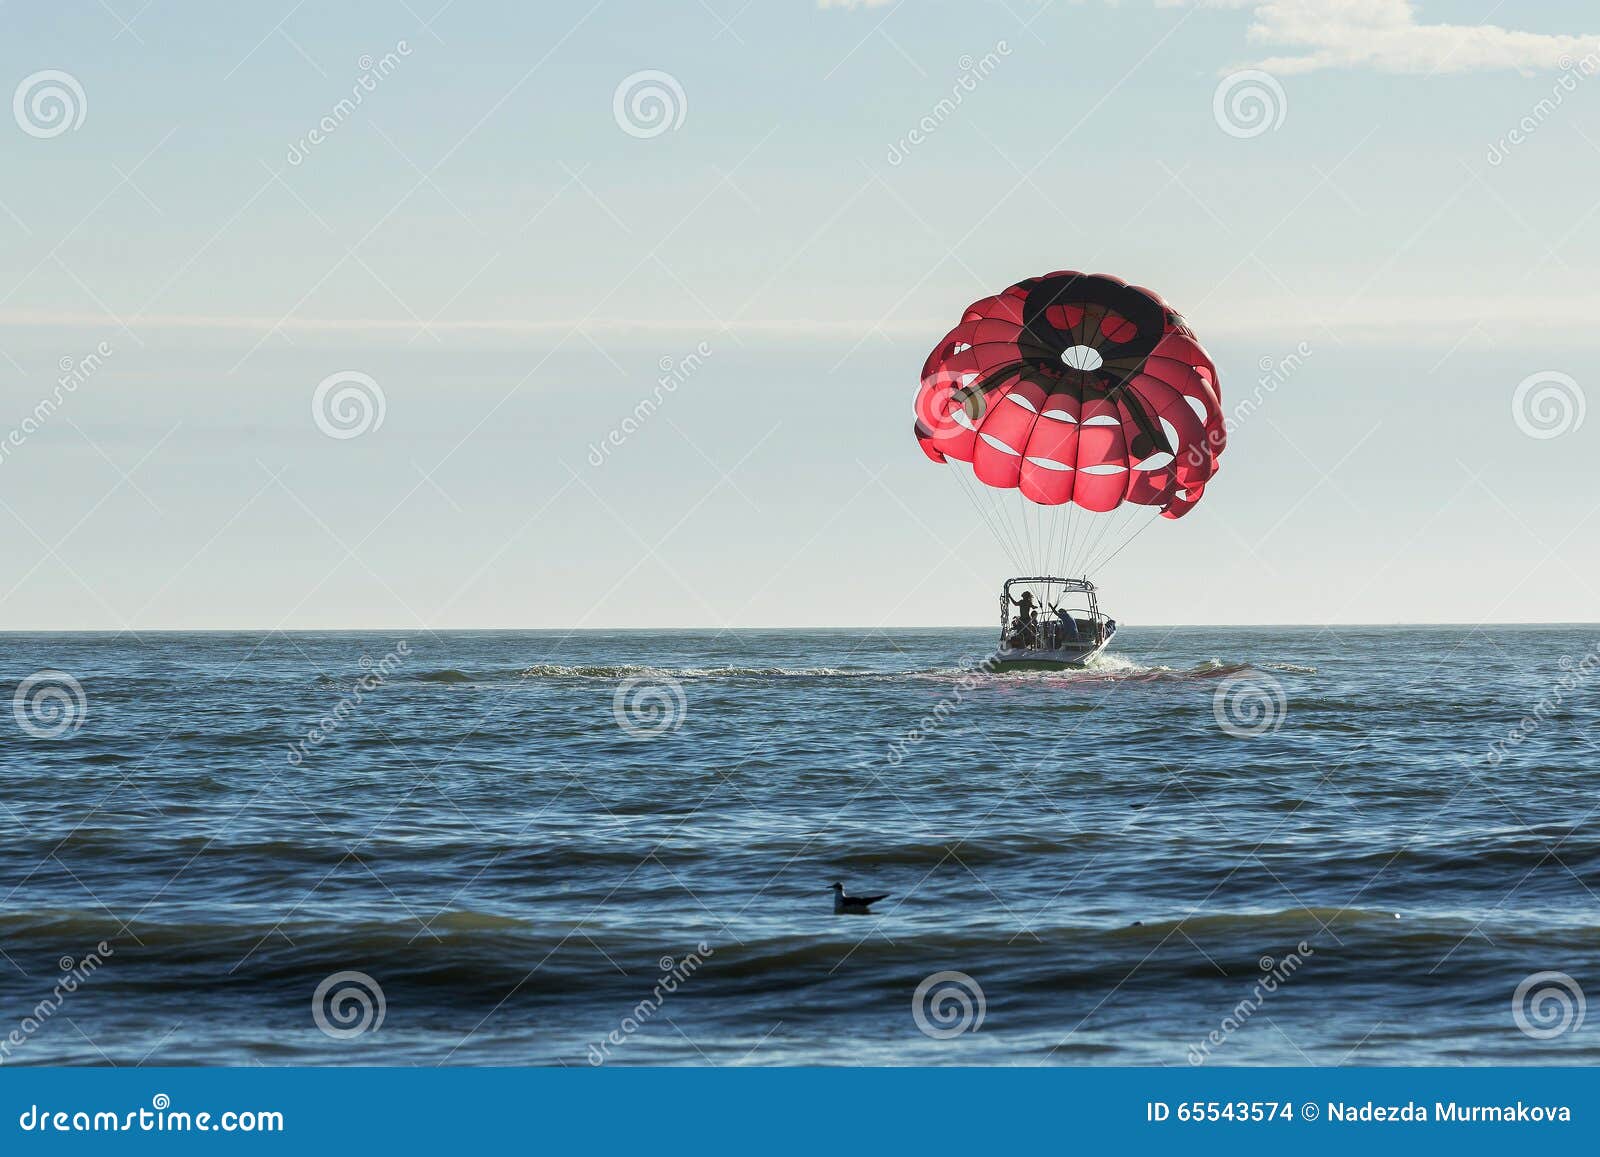 motorboat towing a parasail parachute with a suspended person in